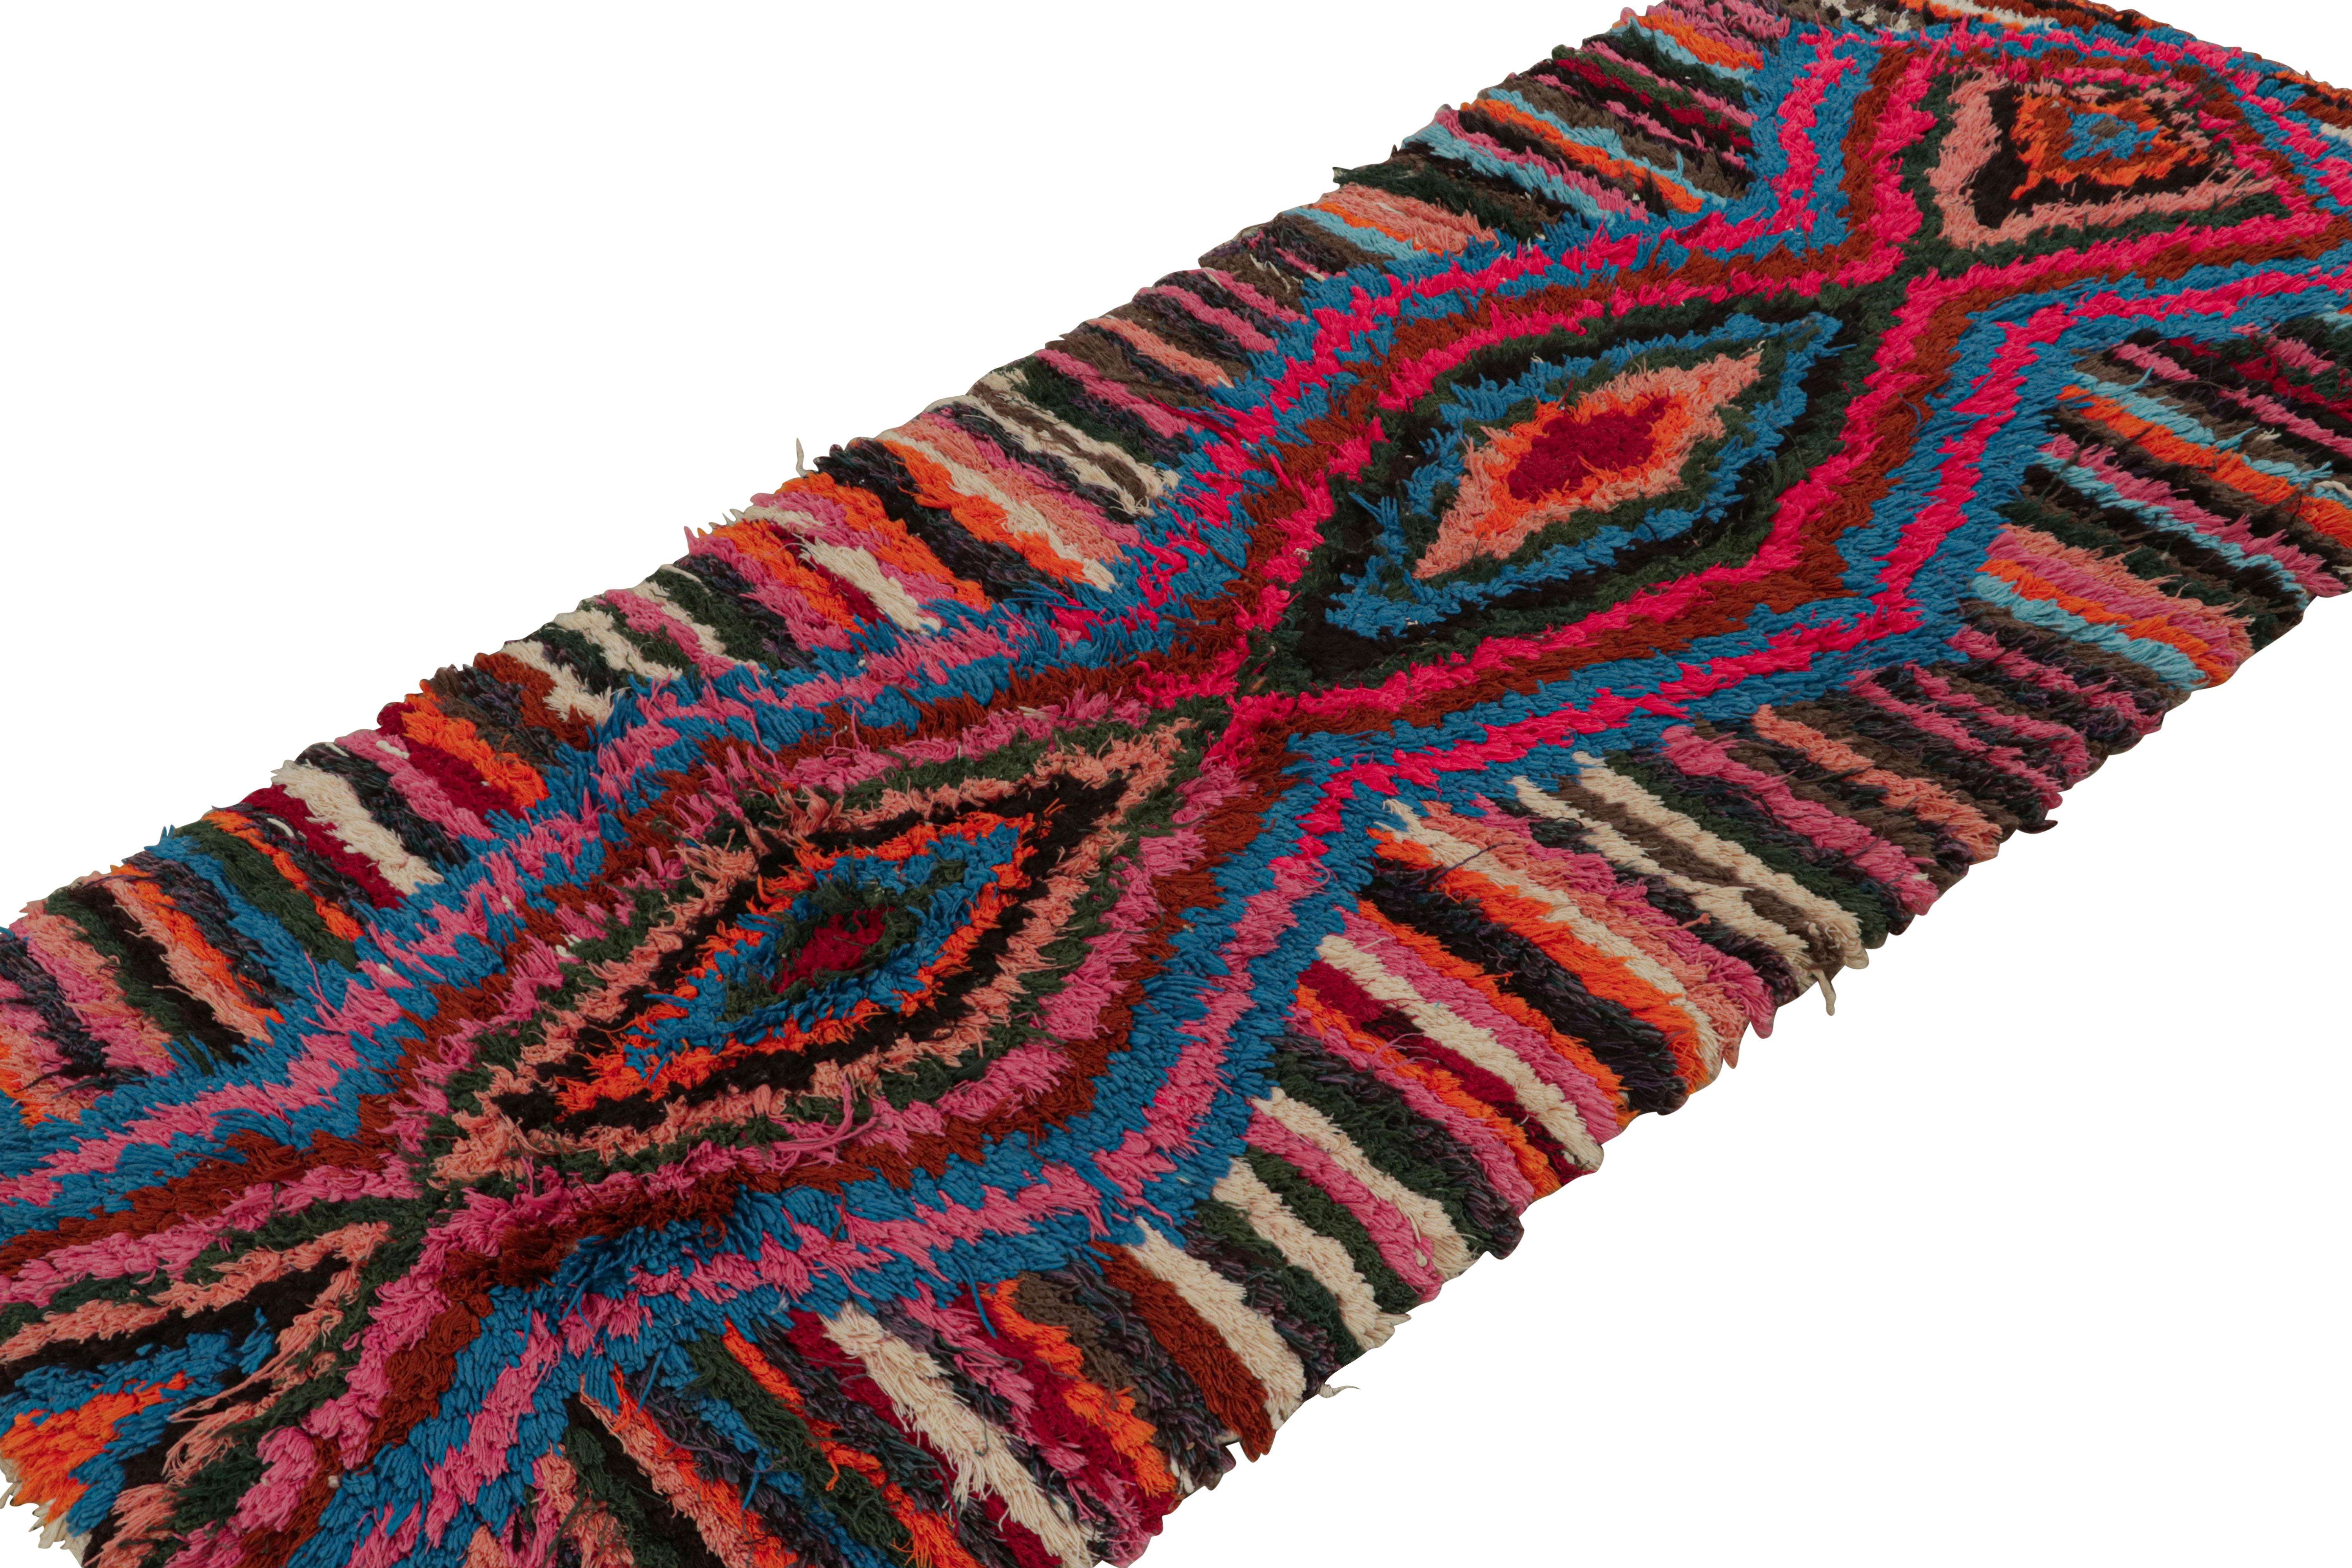 Hand-knotted in wool circa 1950-1960, this 3x6 vintage Moroccan runner rug with polychromatic diamond medallions and geometric stripes, hails from the Azilal tribe.  

On the Design: 

This is an exemplary piece of the playful, bright nature and